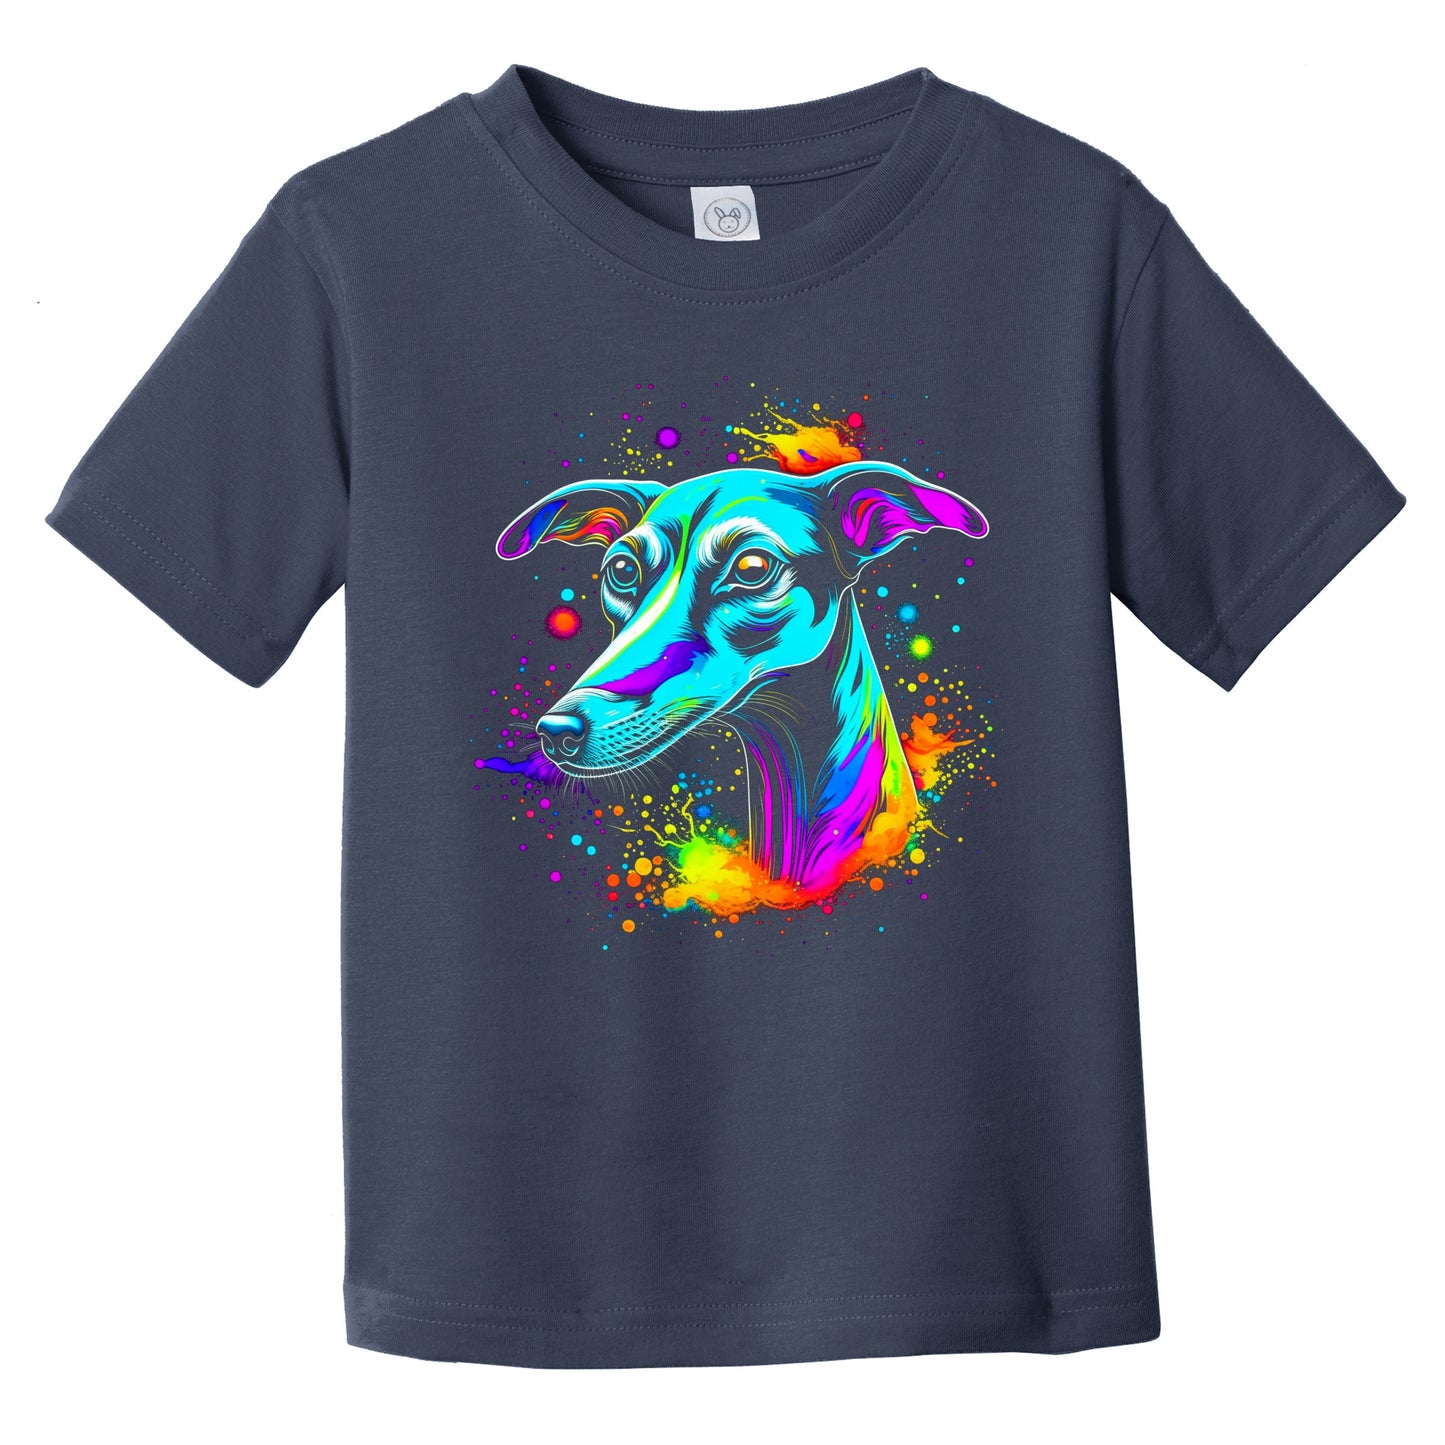 Colorful Bright Whippet Vibrant Psychedelic Dog Art Infant Toddler T-Shirt